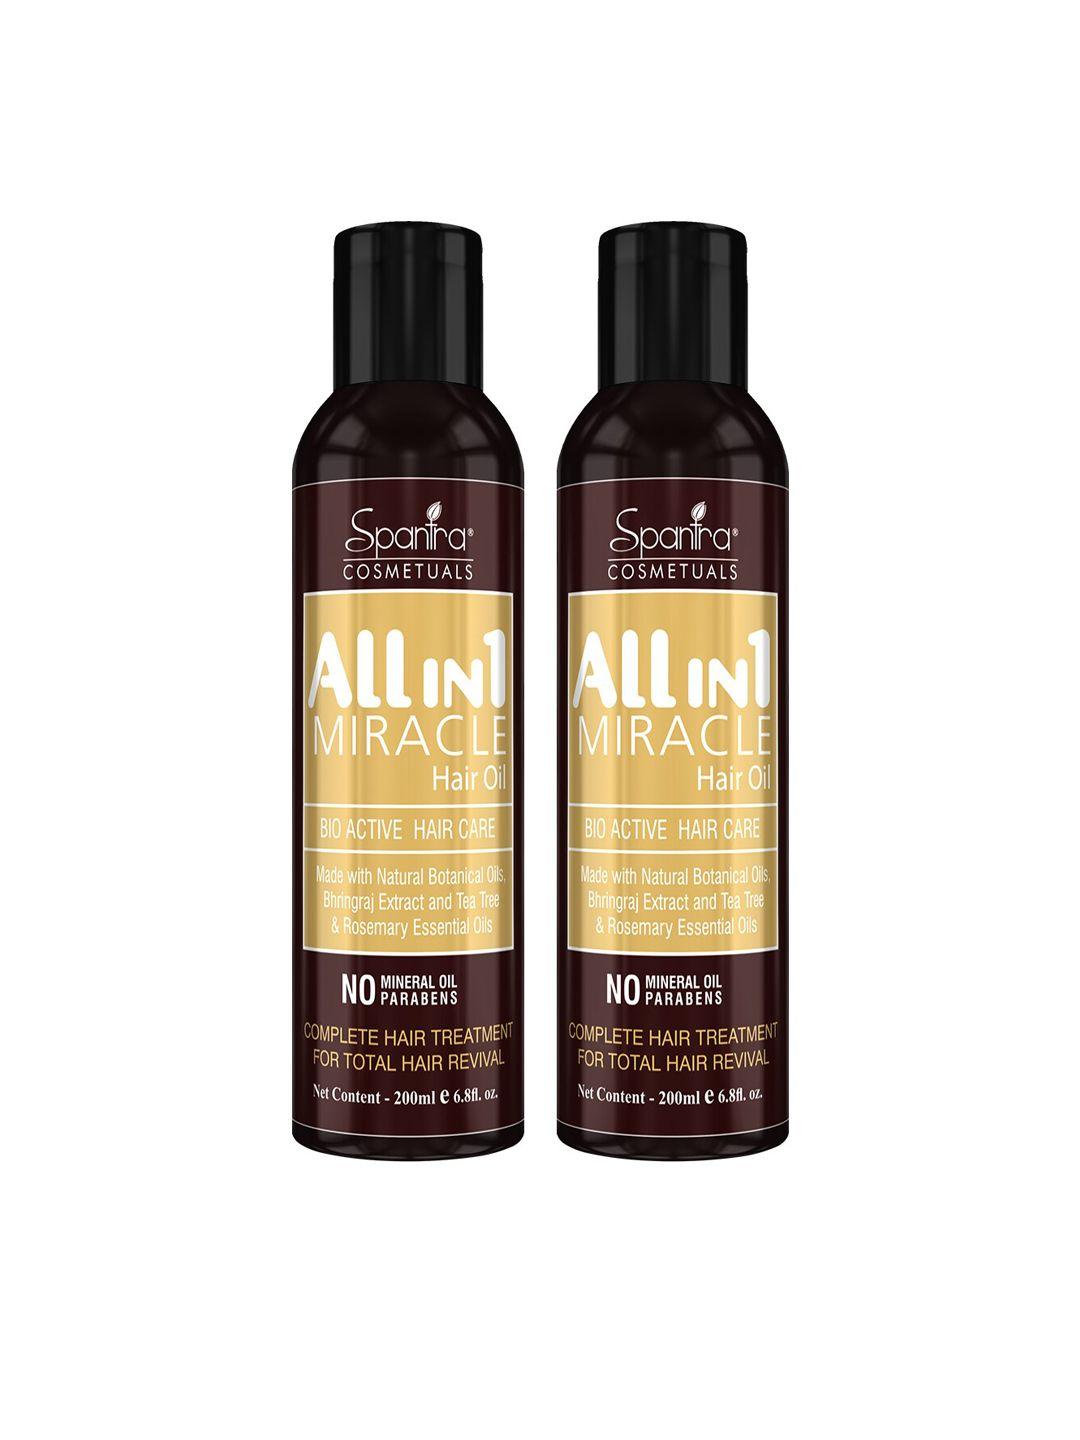 spantra set of 2 all in 1 miracle hair oil - 200 ml each